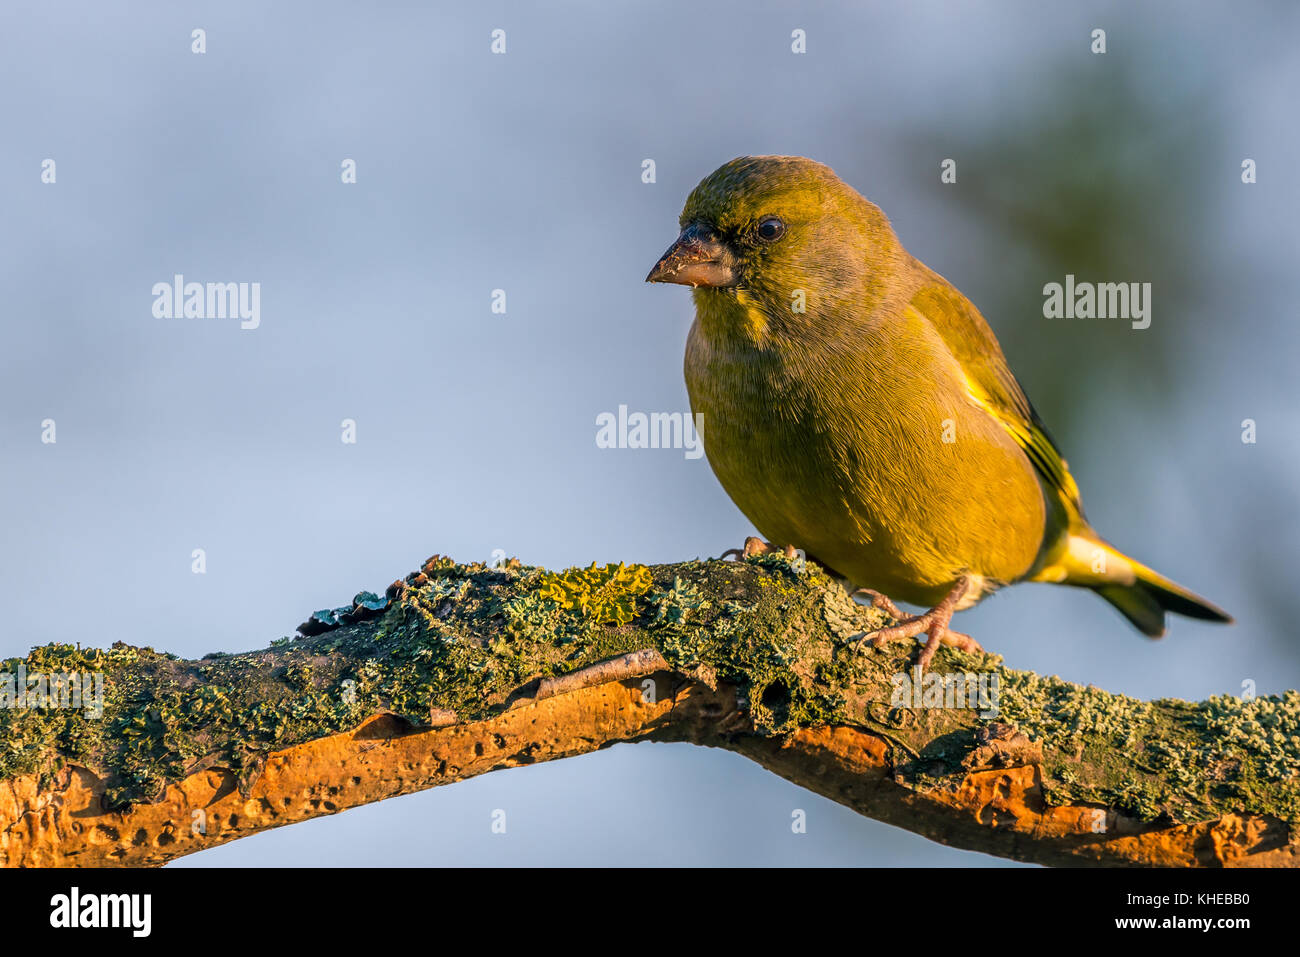 Horizontal photo of nice single greenfinch songbird. Bird is perched on worn twig partially covered by bark, moss and lichen. Background is blurred. B Stock Photo